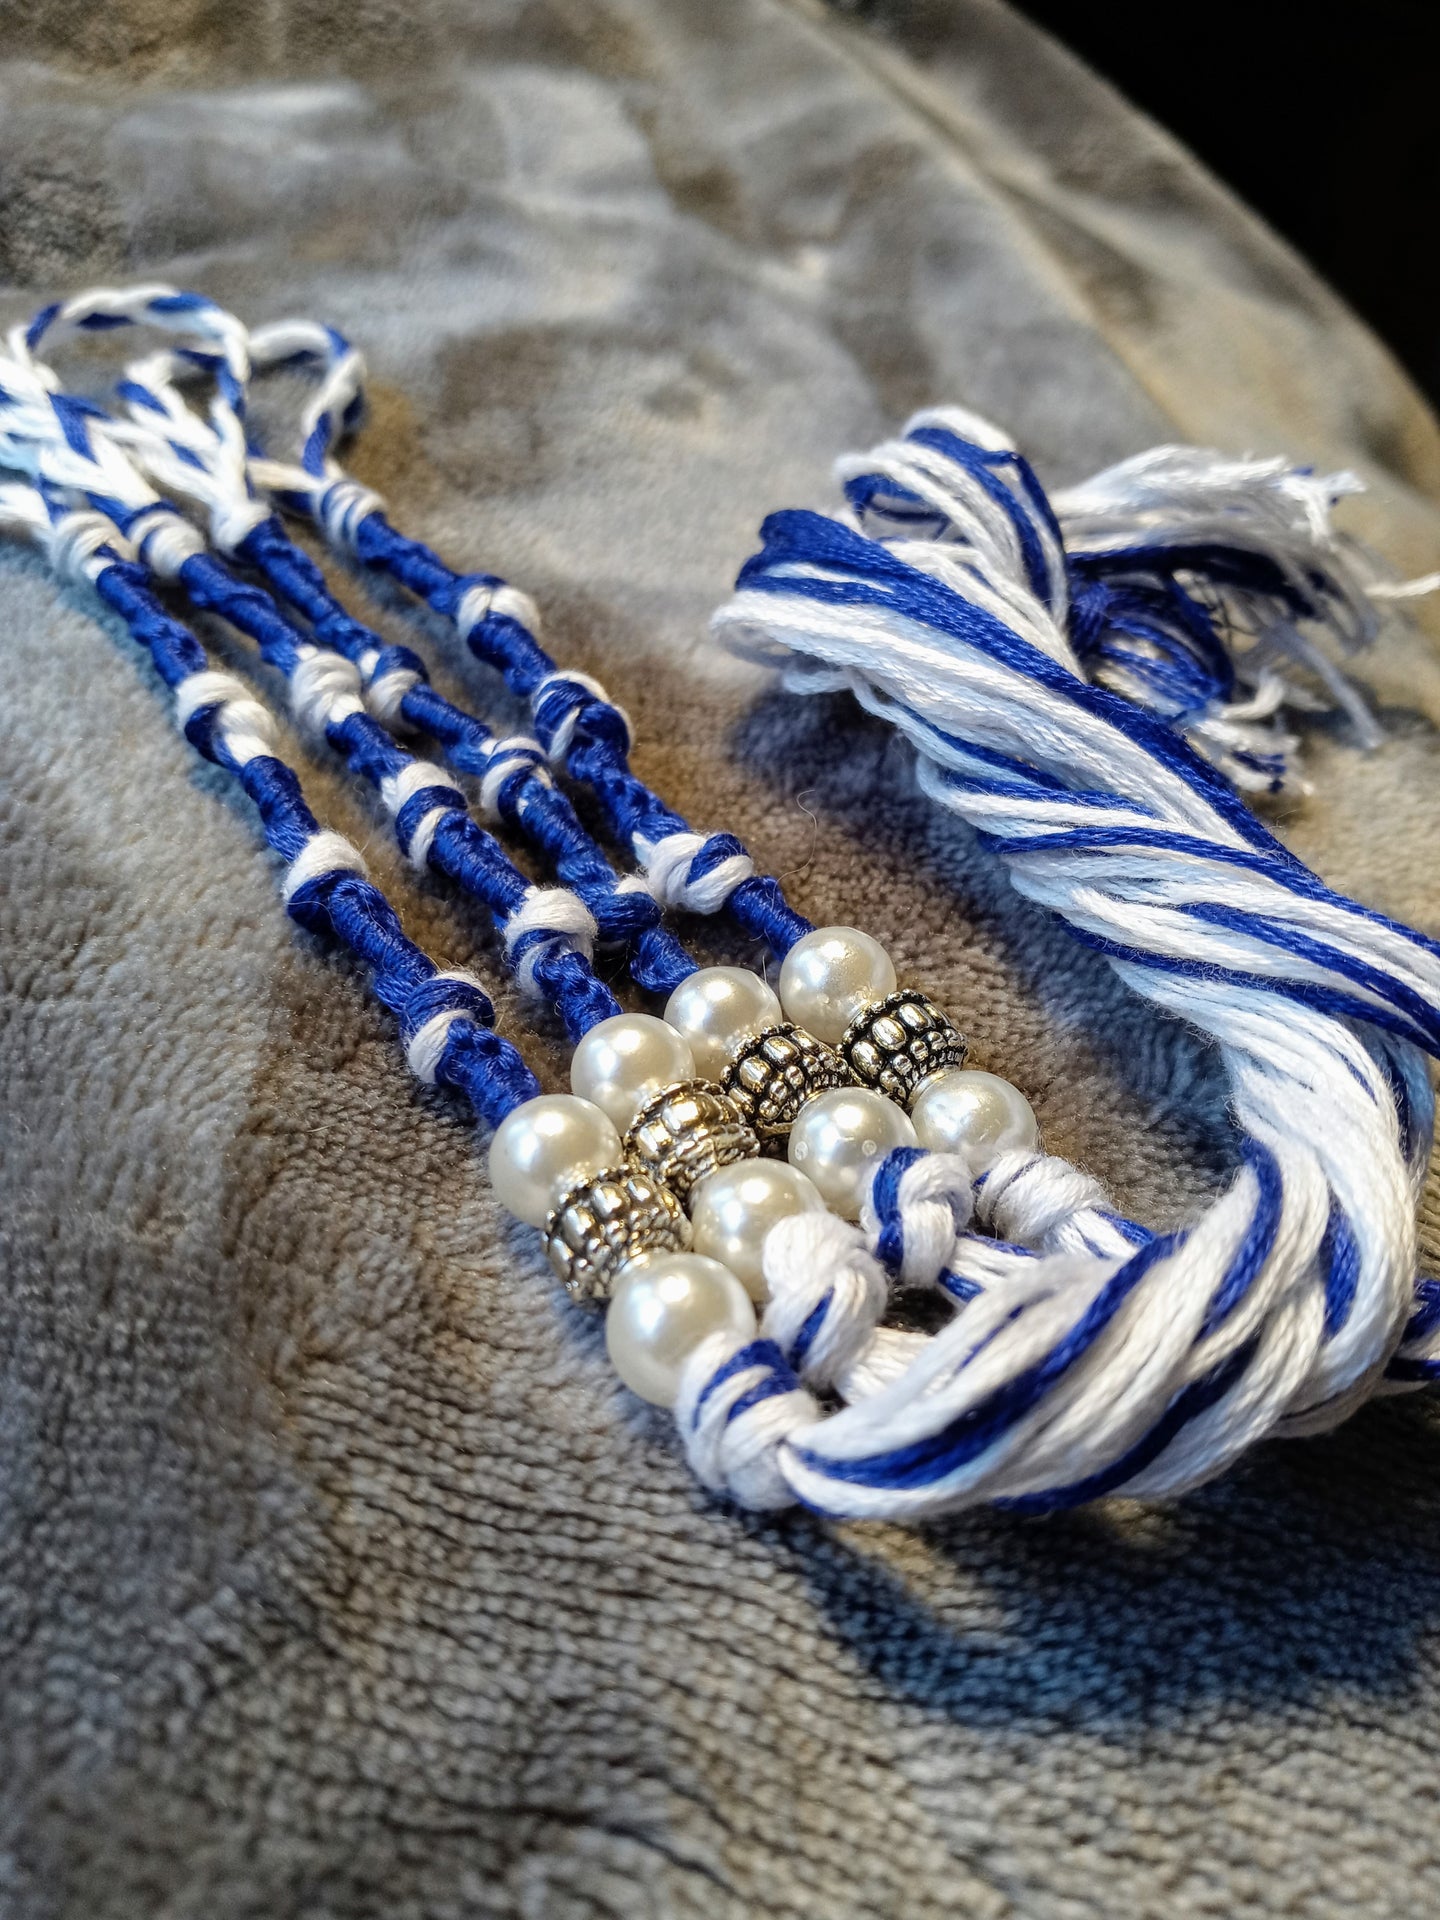 Royal blue and white tzitzyot with white pearls and silver-colored beads